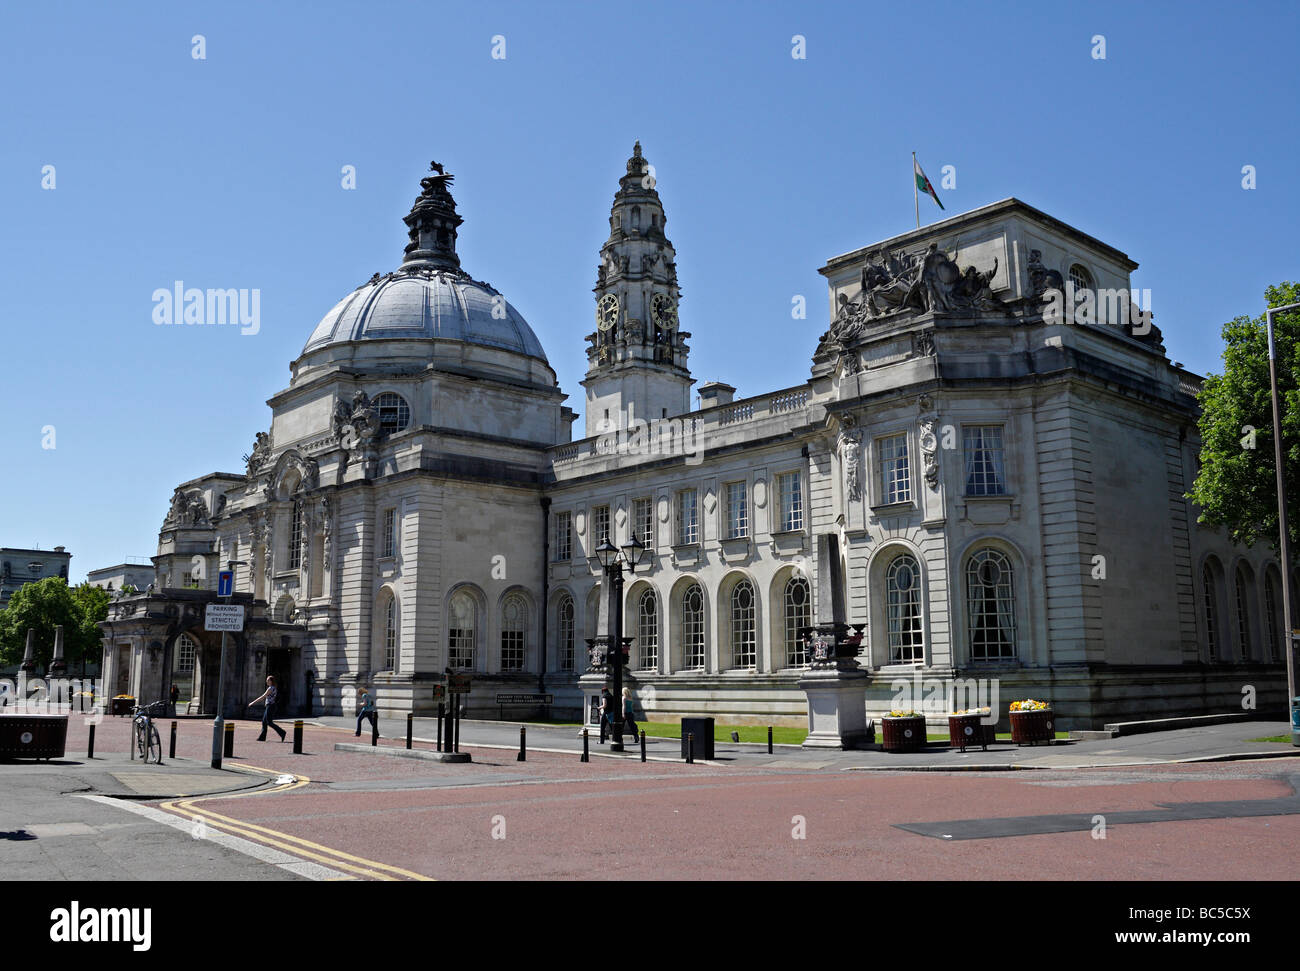 Cardiff city hall at cathays park. Wales UK, Welsh capital city civic centre Stock Photo